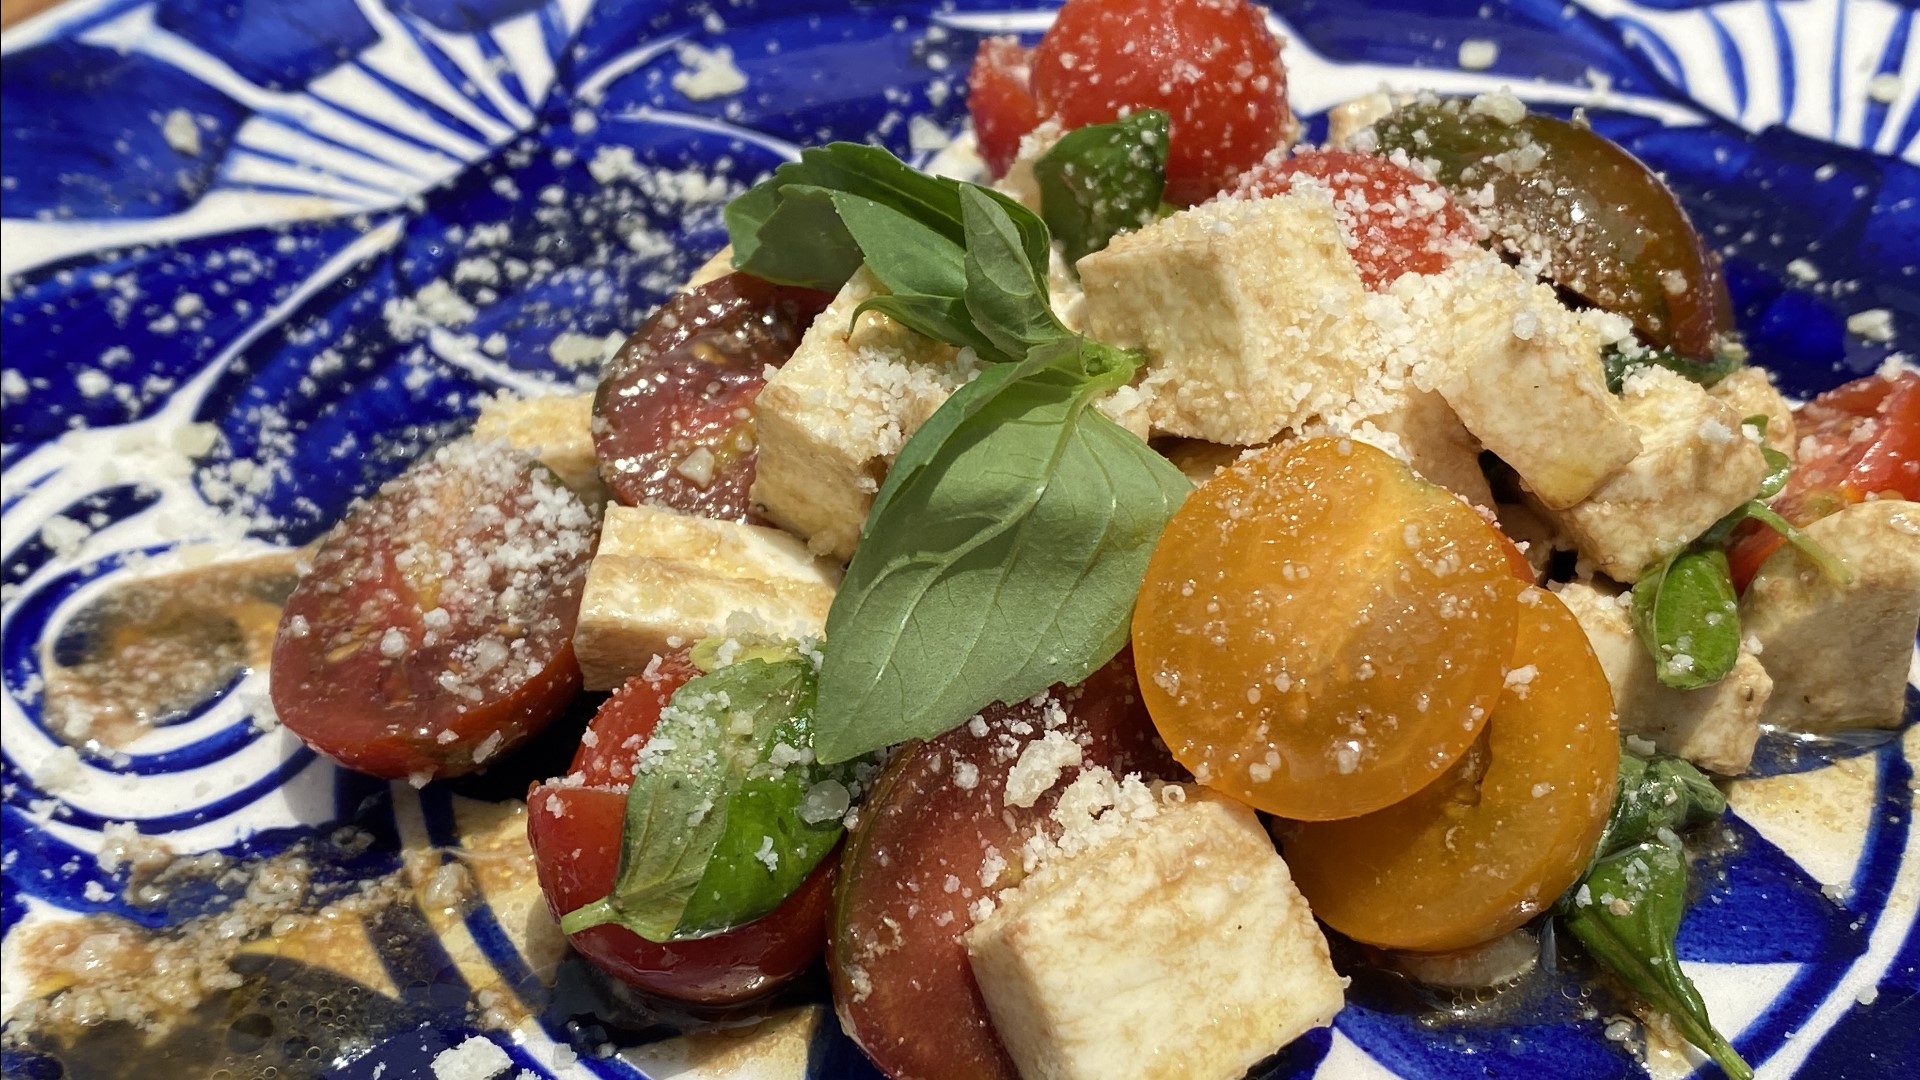 It's BBQ season and this tossed Caprese Salad is the perfect side to those summer cookouts.